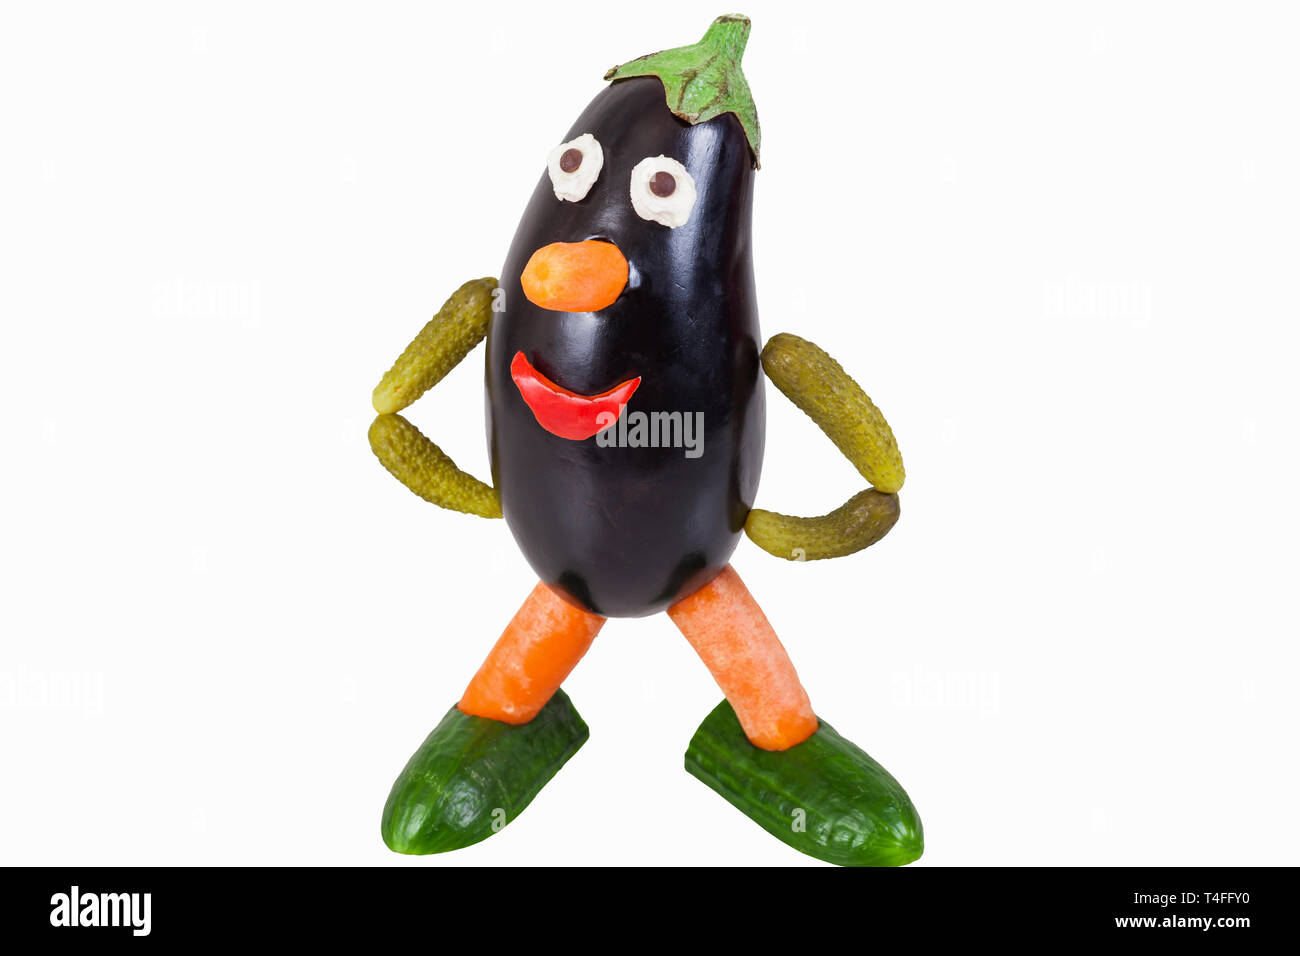 Funny figure carved out of an aubergine - isolated Stock Photo